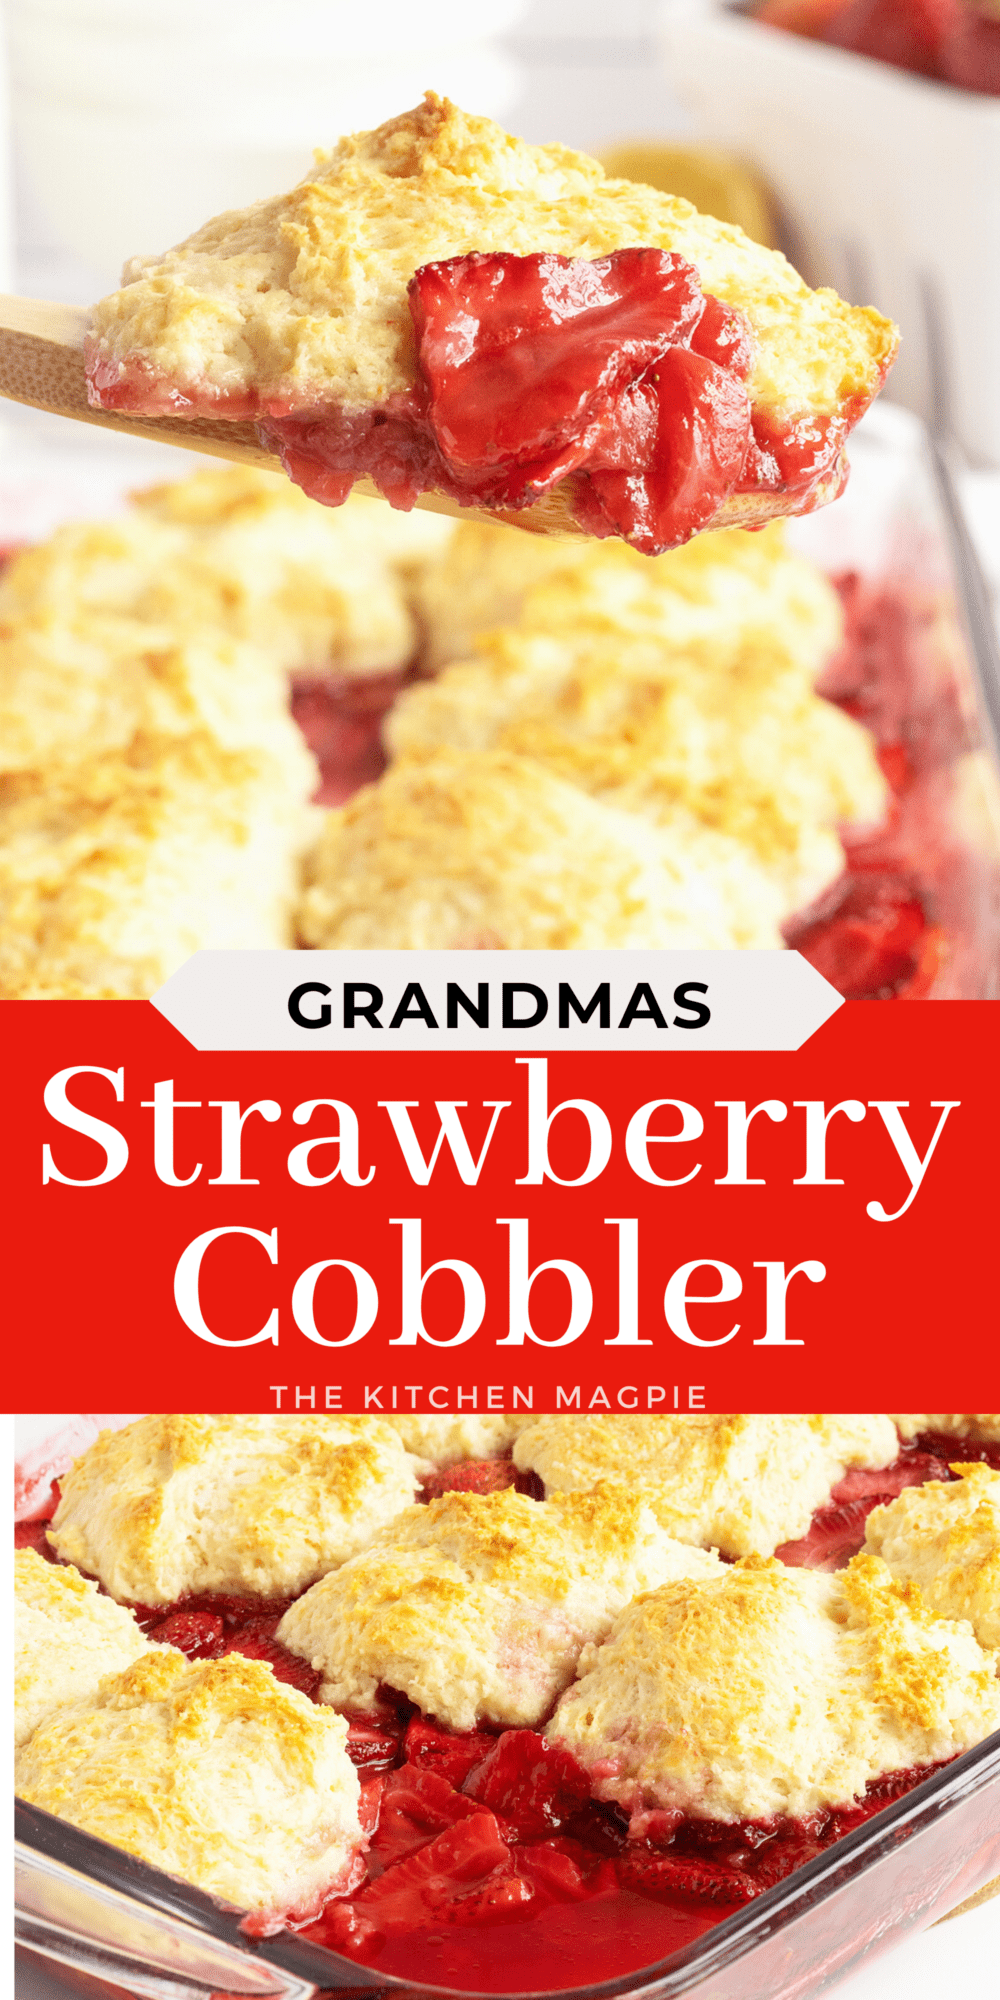 Cobbler is one of the most classic desserts out there for a reason. This classic Southern version uses fresh, juicy strawberries to make a tangy, summery cobbler that might just become your new favorite cobbler ever! 